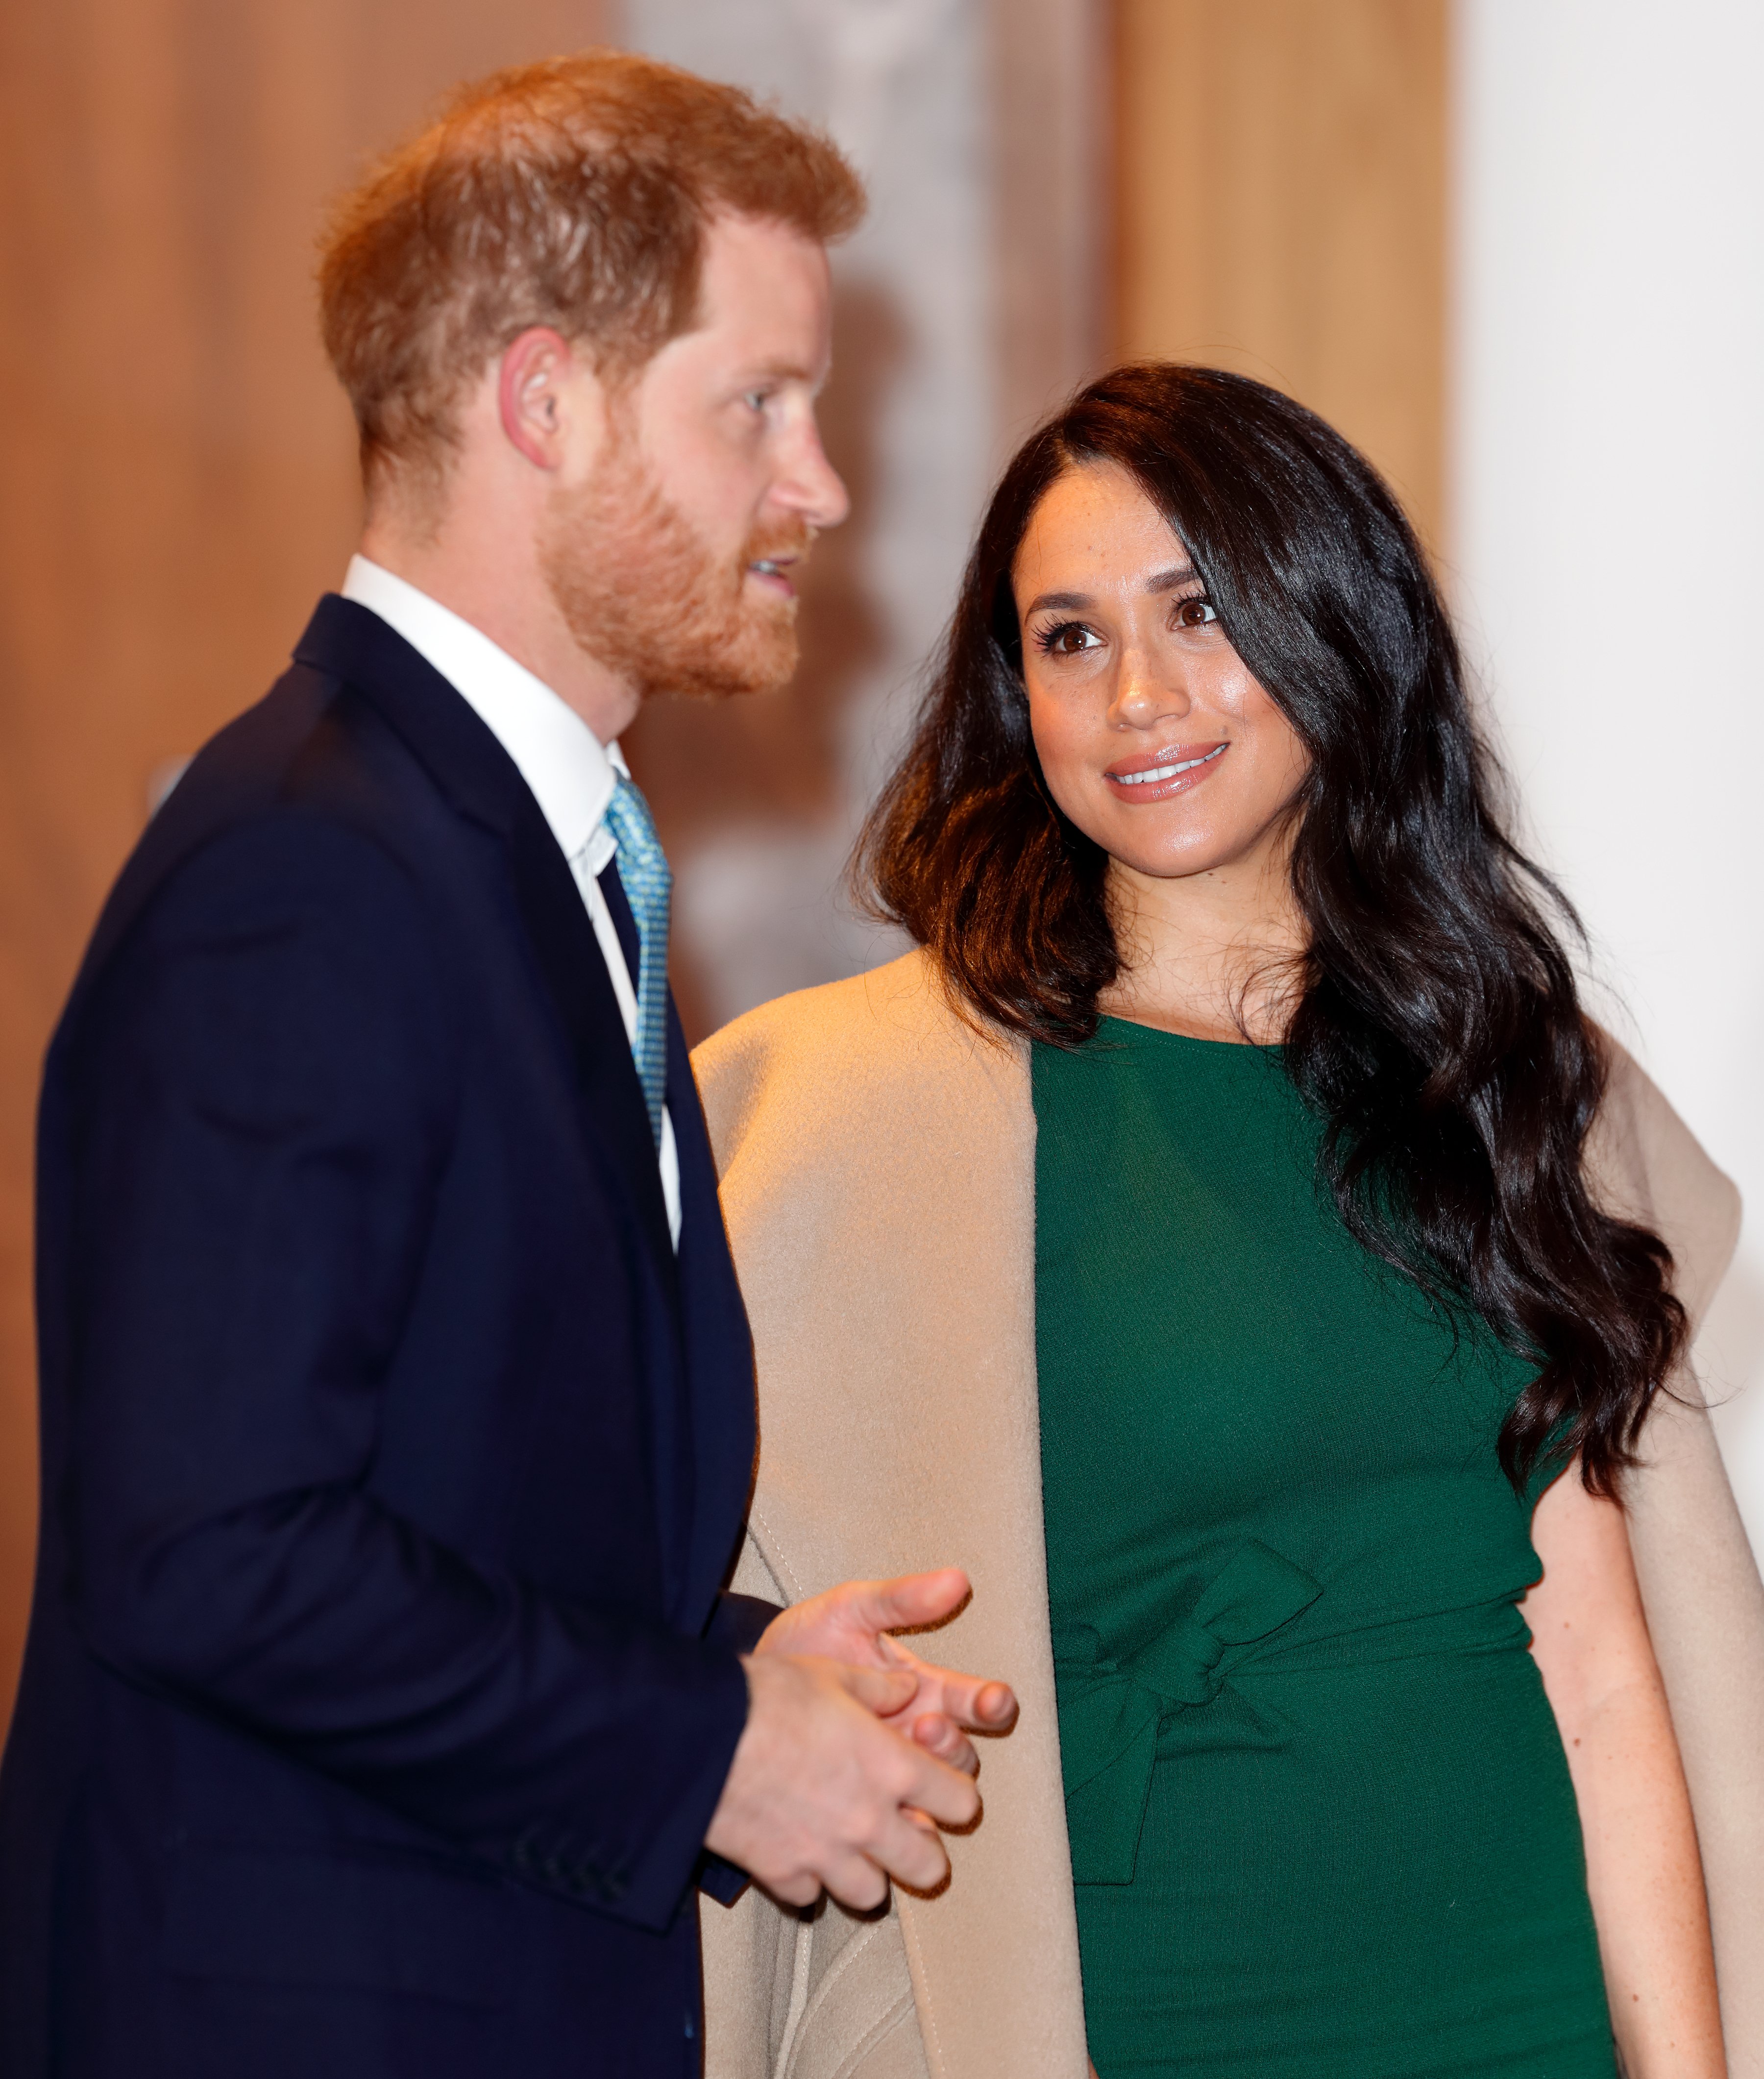 Prince Harry and Meghan Markle attend the WellChild awards at the Royal Lancaster Hotel on October 15, 2019 in London, England | Photo: Getty Images